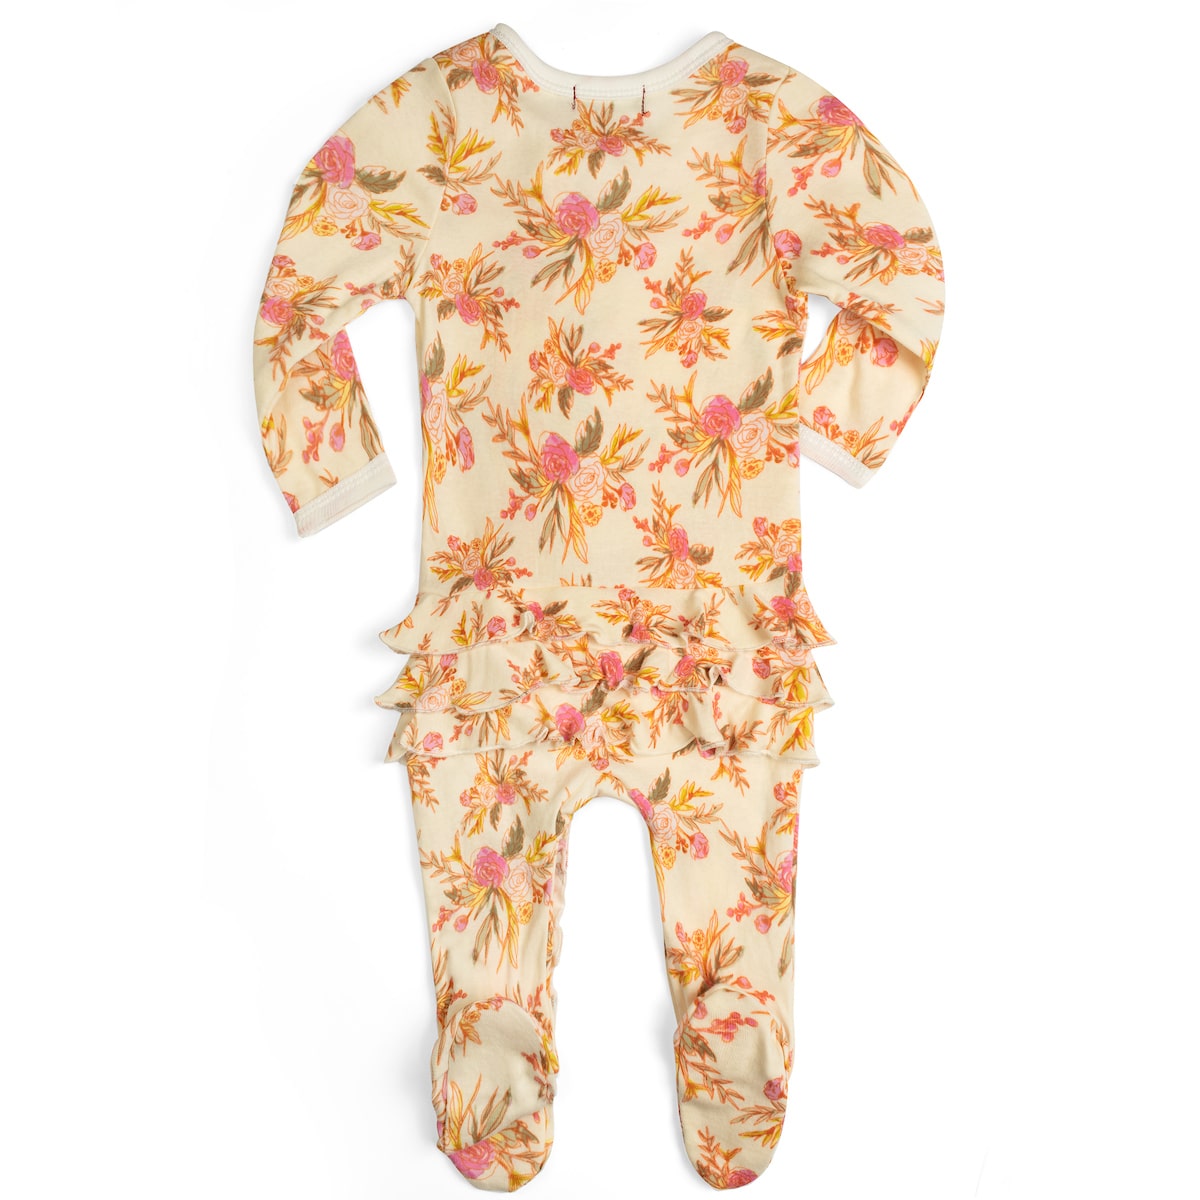 View Milkbarn - Cotton Footed Ruffle Romper, Vintage Floral